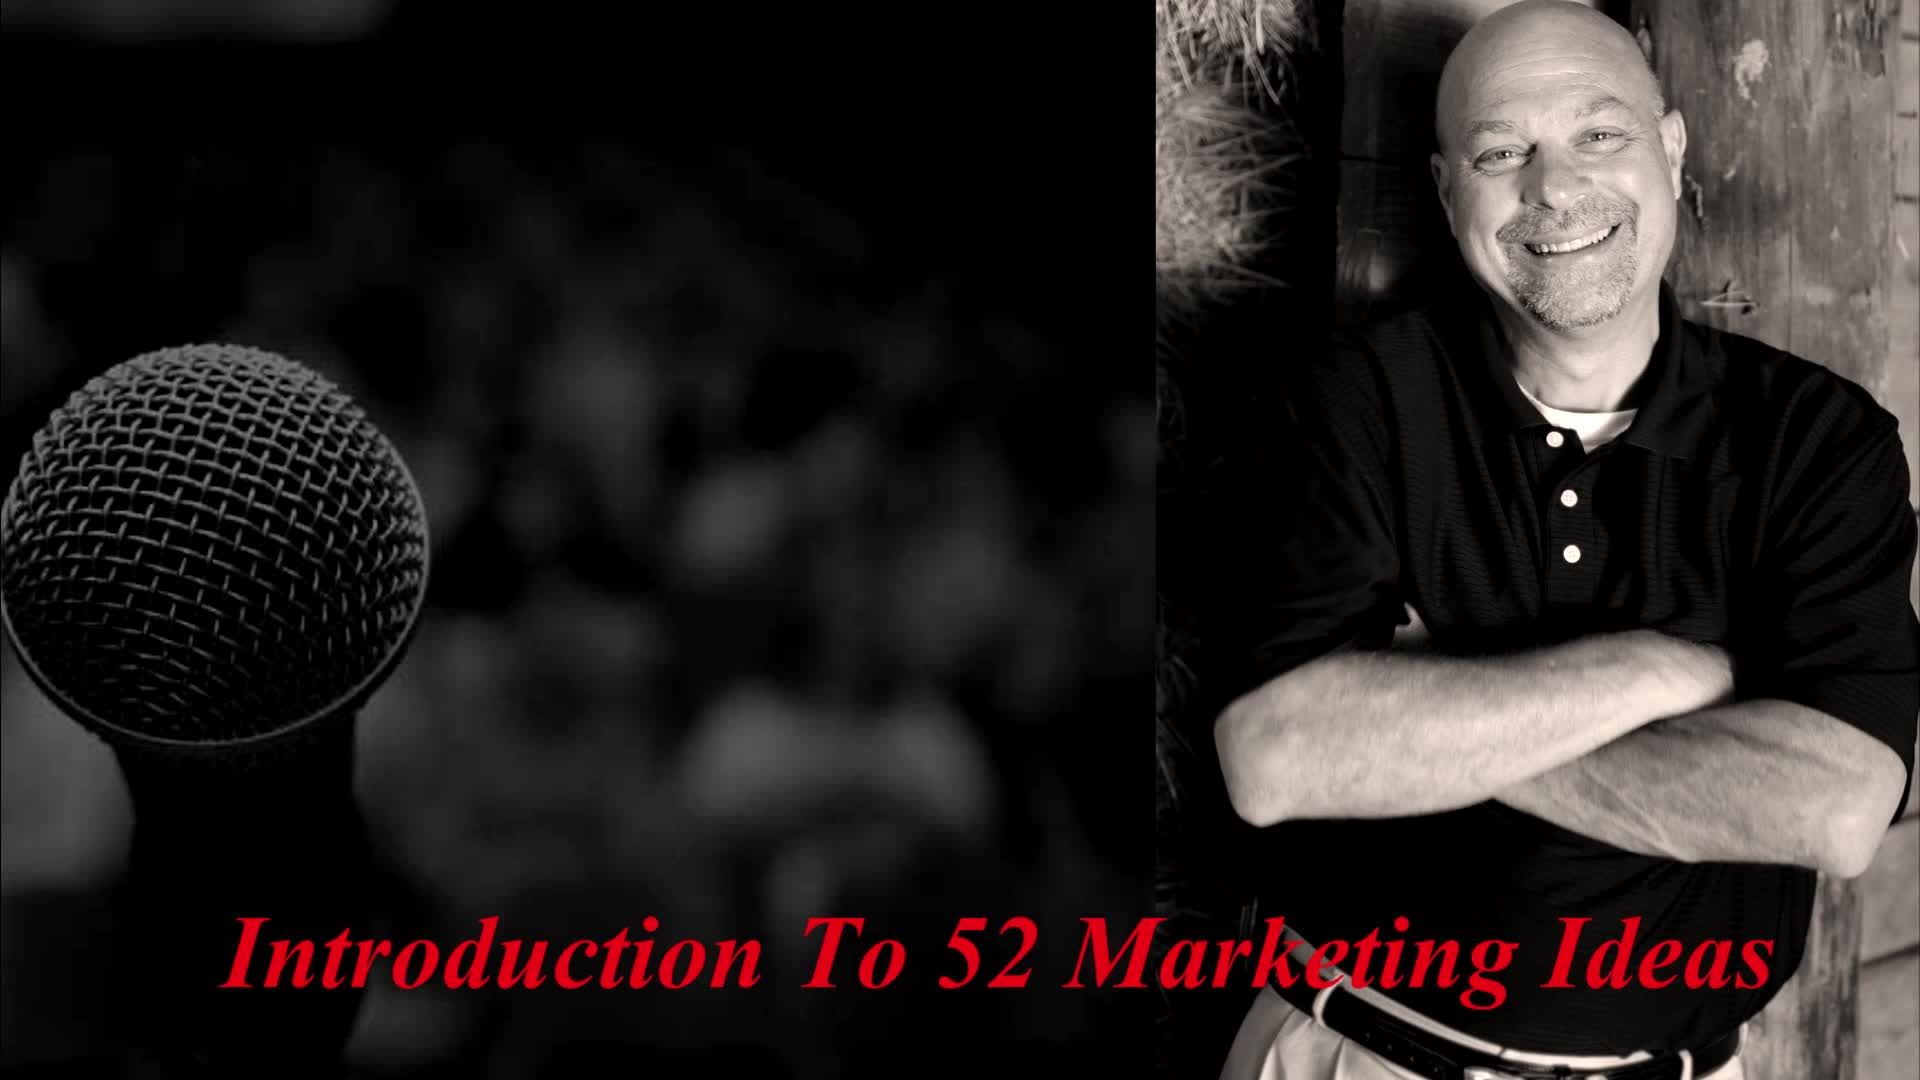 Introduction to 52 marketing ideas